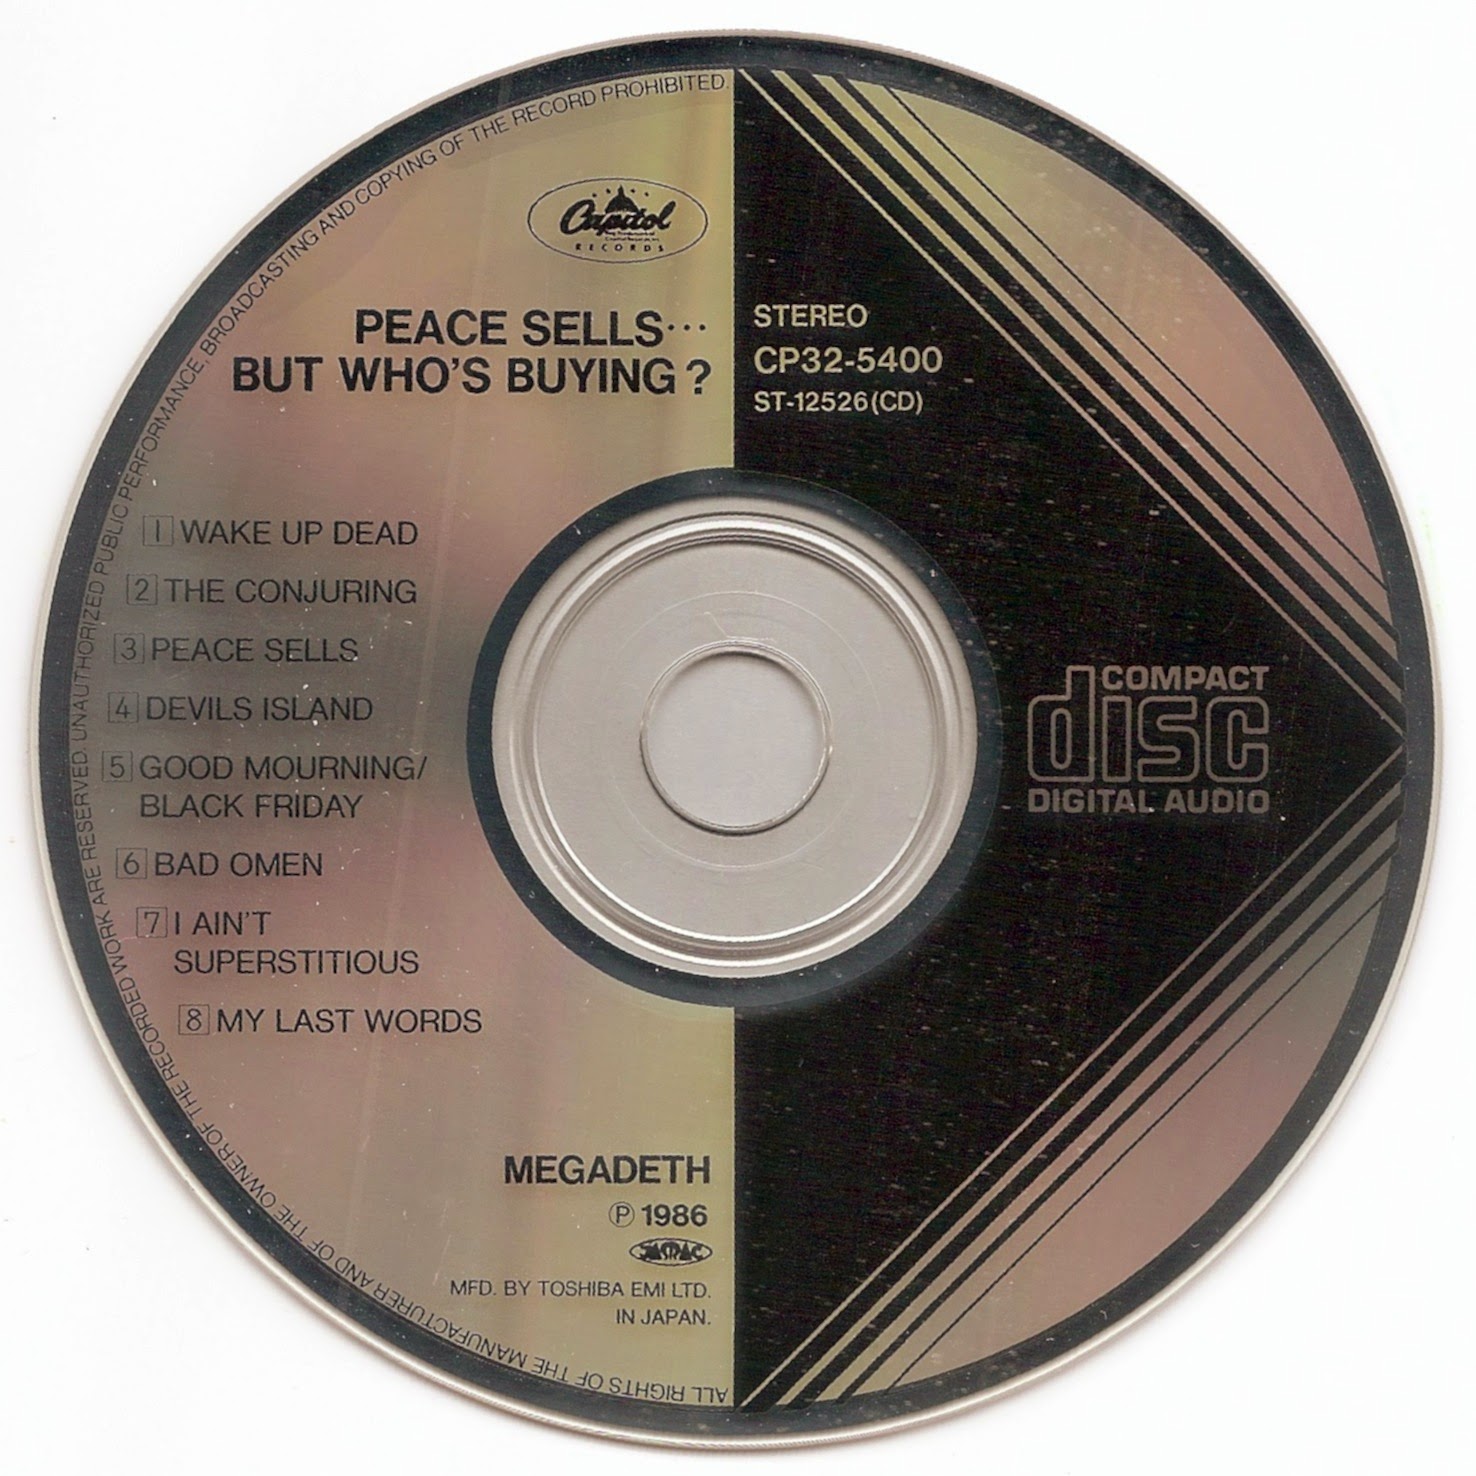 The First Pressing CD Collection: Megadeth - Peace Sells... but